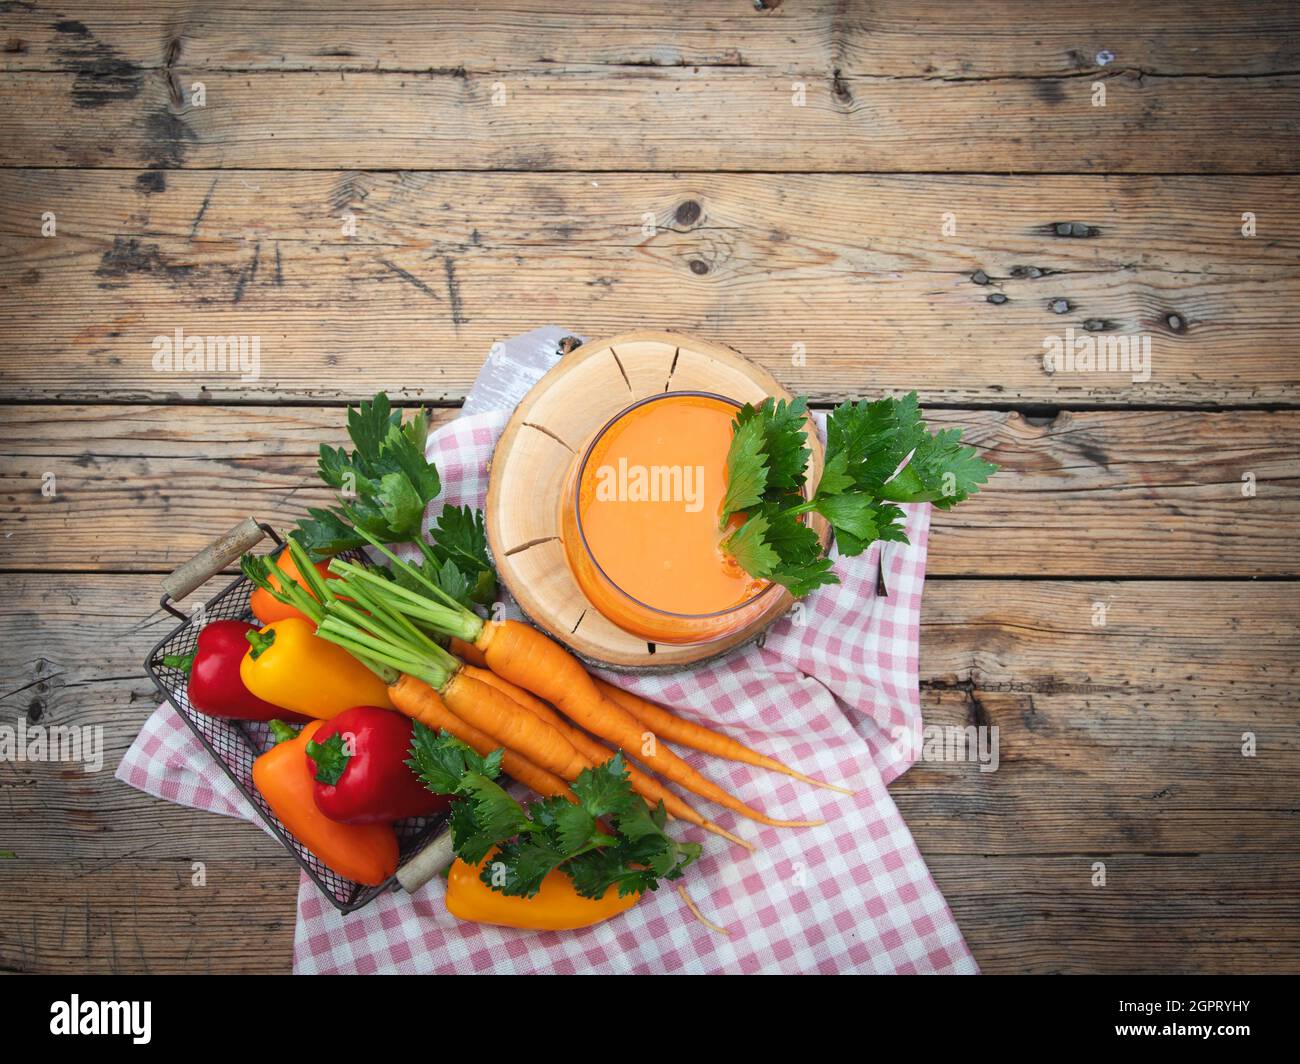 Fresh squeezed smoothie bell pepper, carrot, juice vegetable in a glass. Healthy eating, detox, dieting. Stock Photo